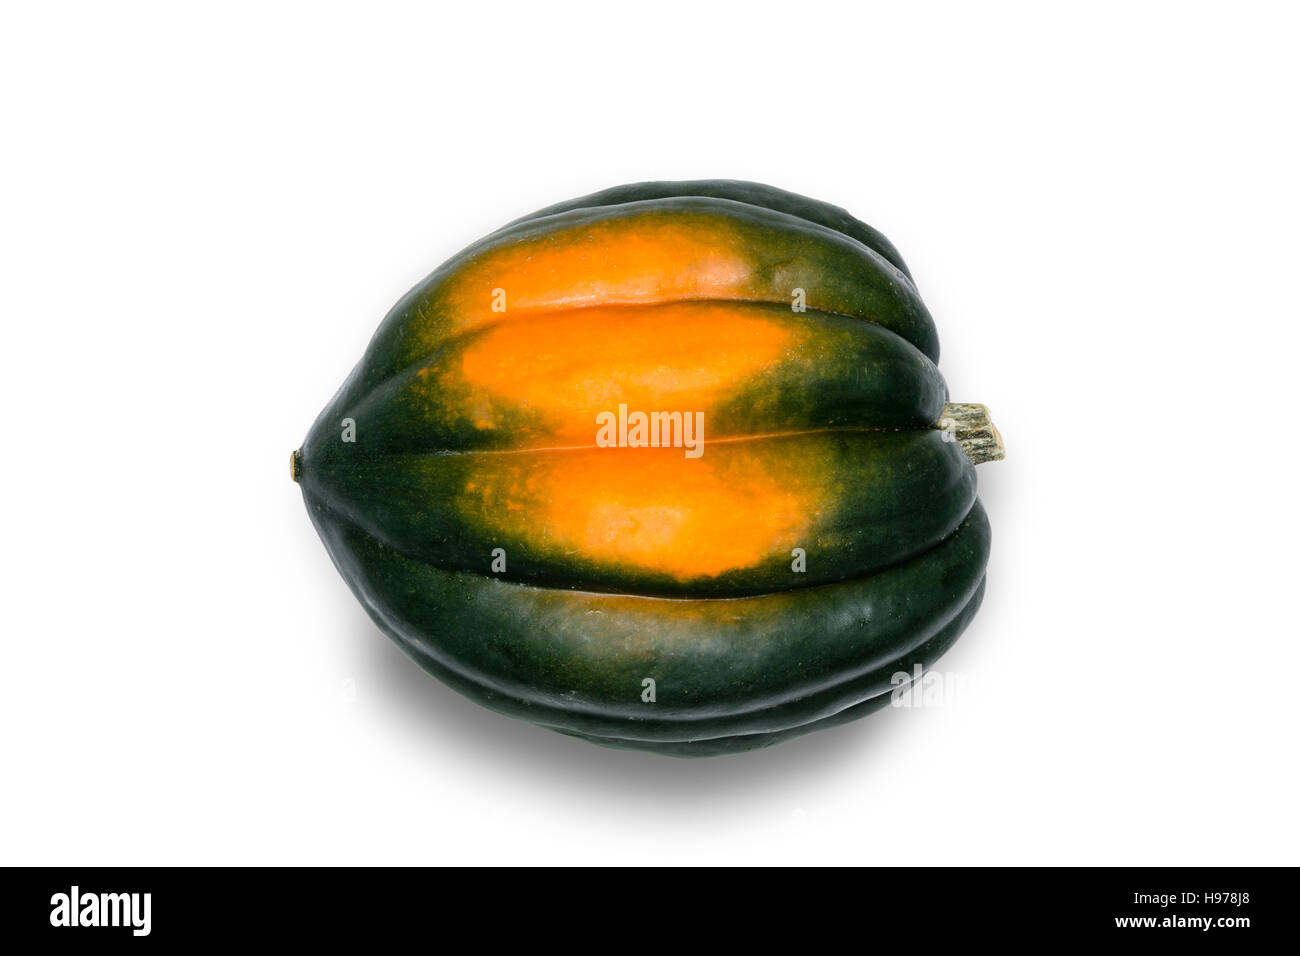 Close Up Side View Still Life of Single Whole Acorn Squash with Green and Orange Skin in Silhouette on White Studio Background with Copy Space Stock Photo